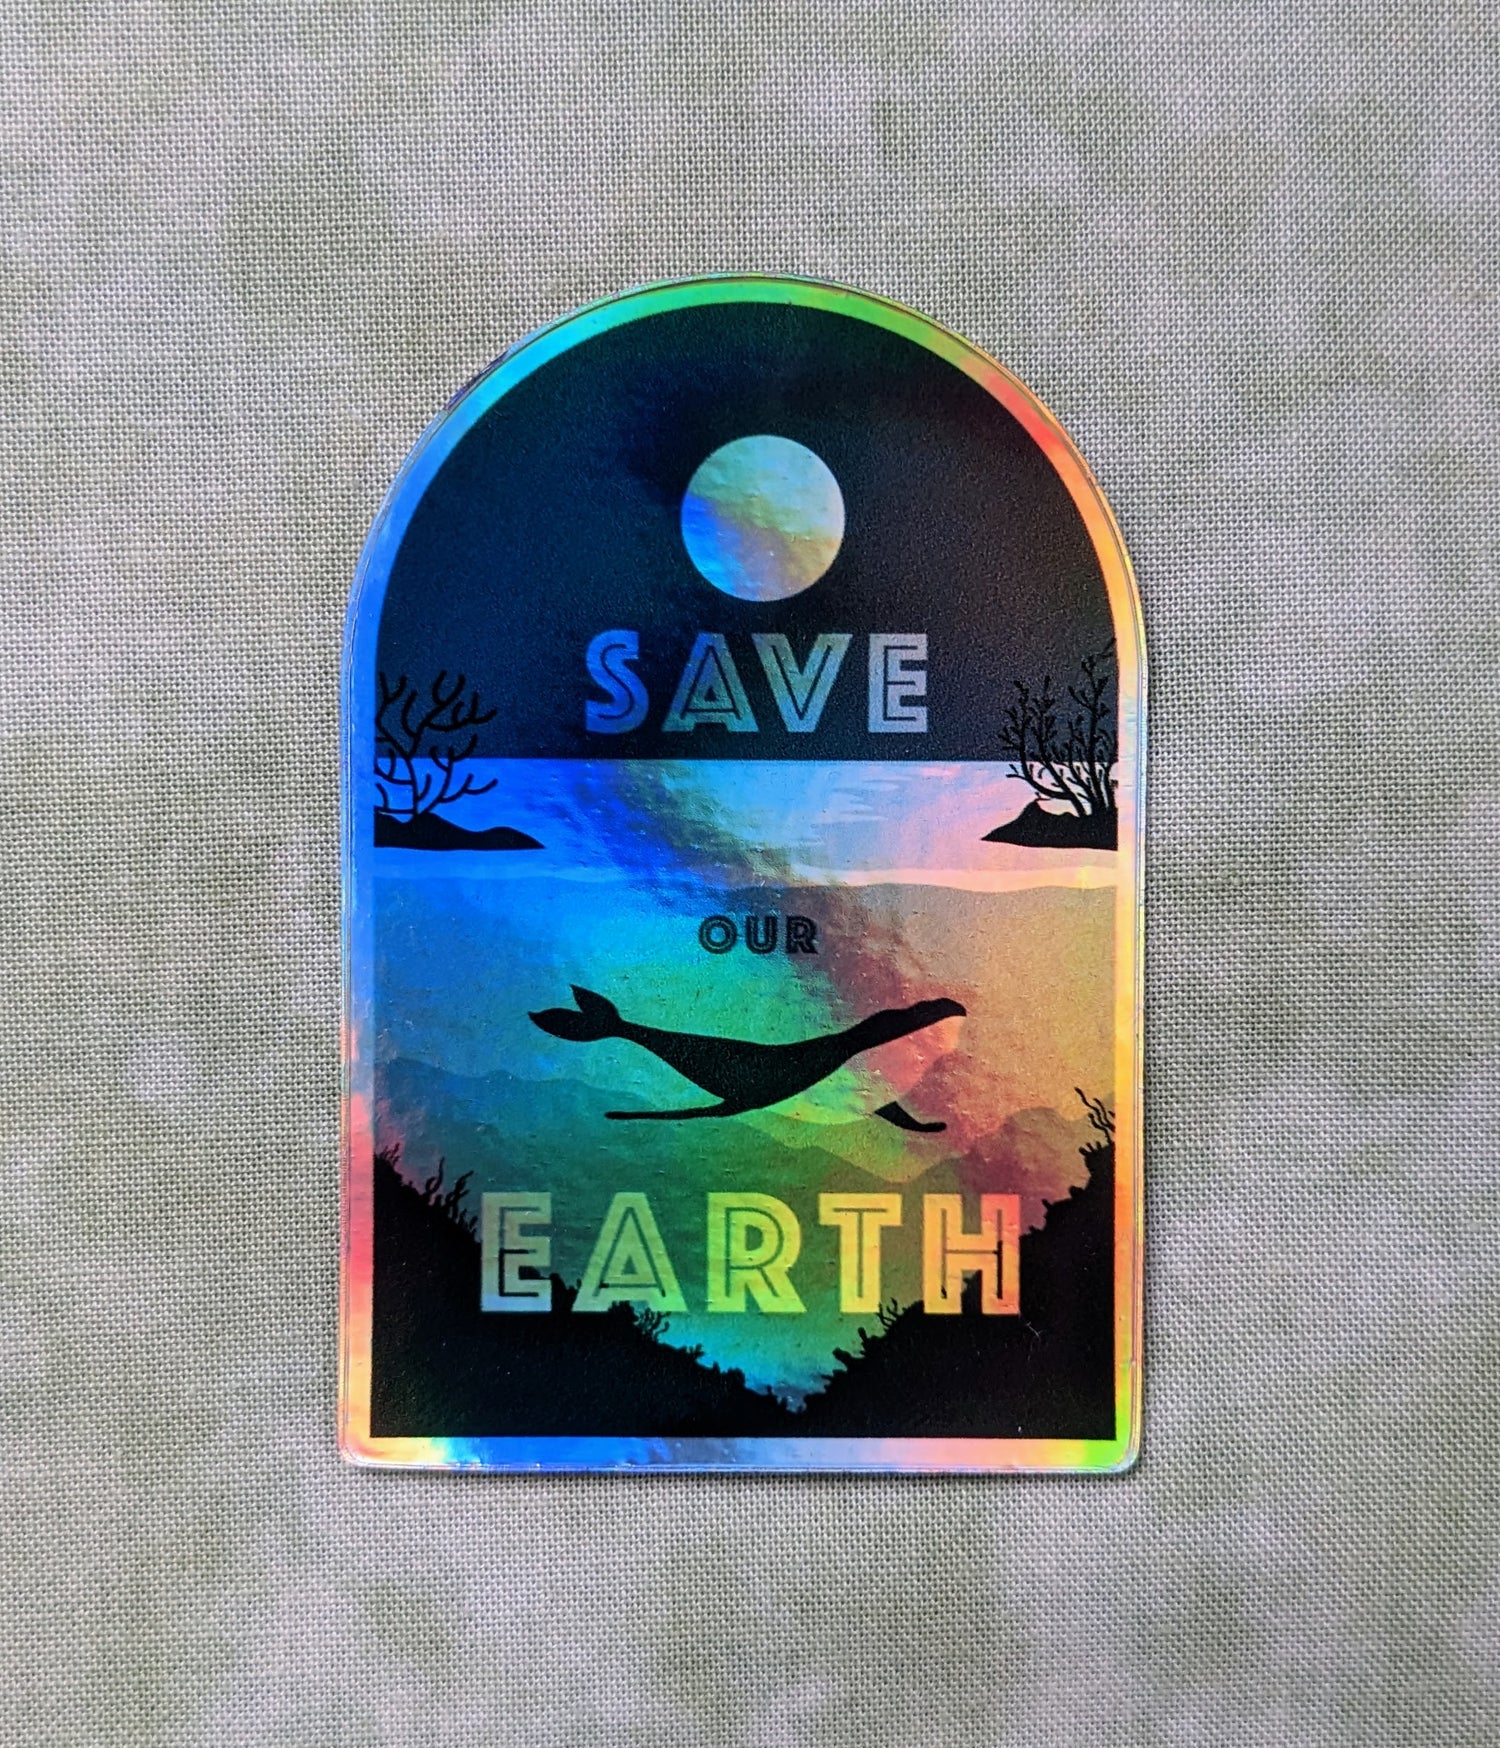 Arched sticker with ocean whale scene reading "Save our earth"  created by Jackie from Present